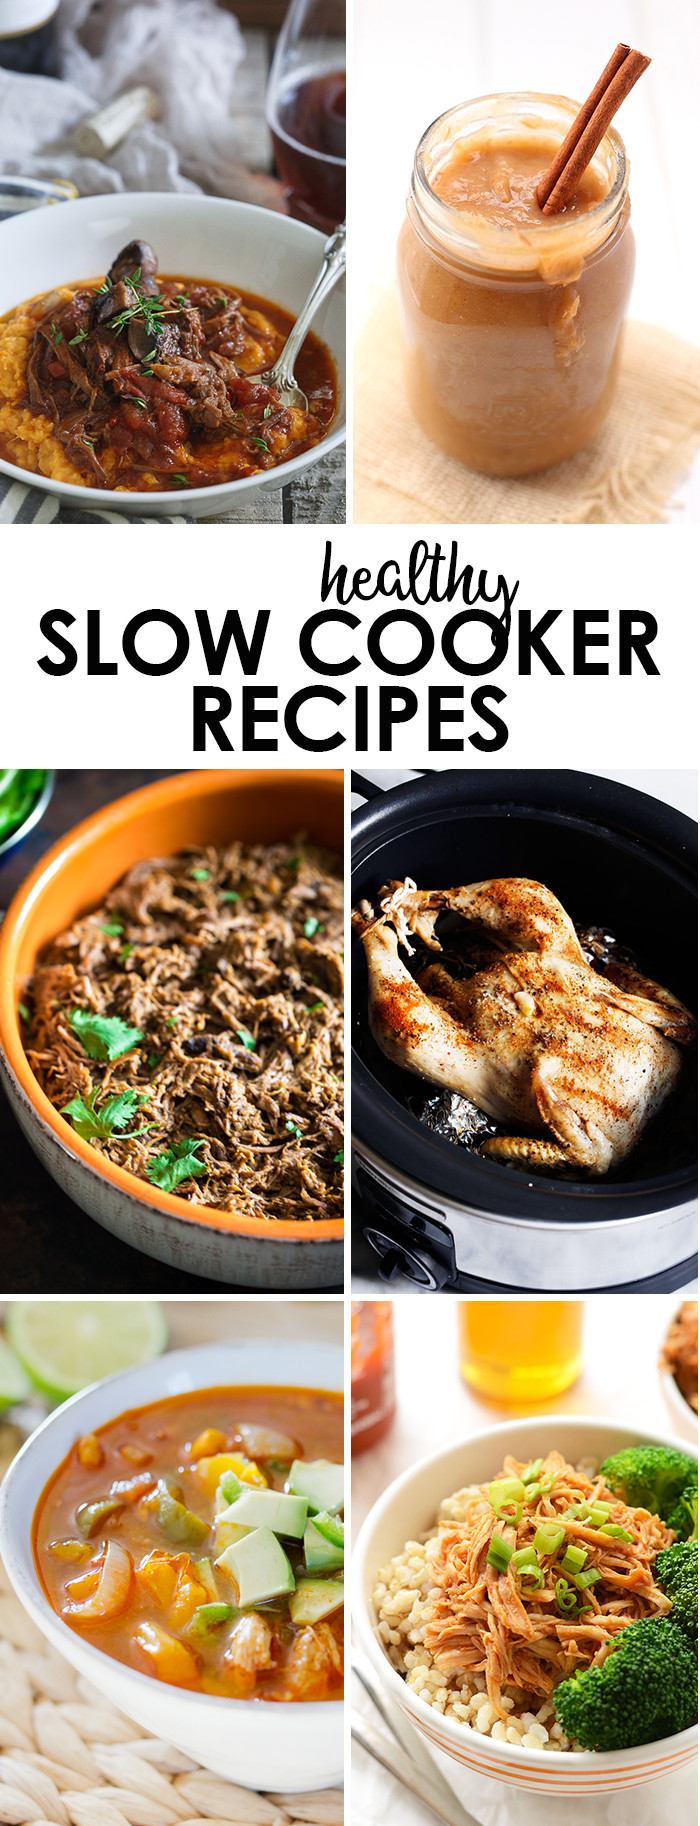 Chicken Slow Cooker Recipes Healthy
 5 Ingre nt Honey Sriracha Slow Cooker Chicken Fit